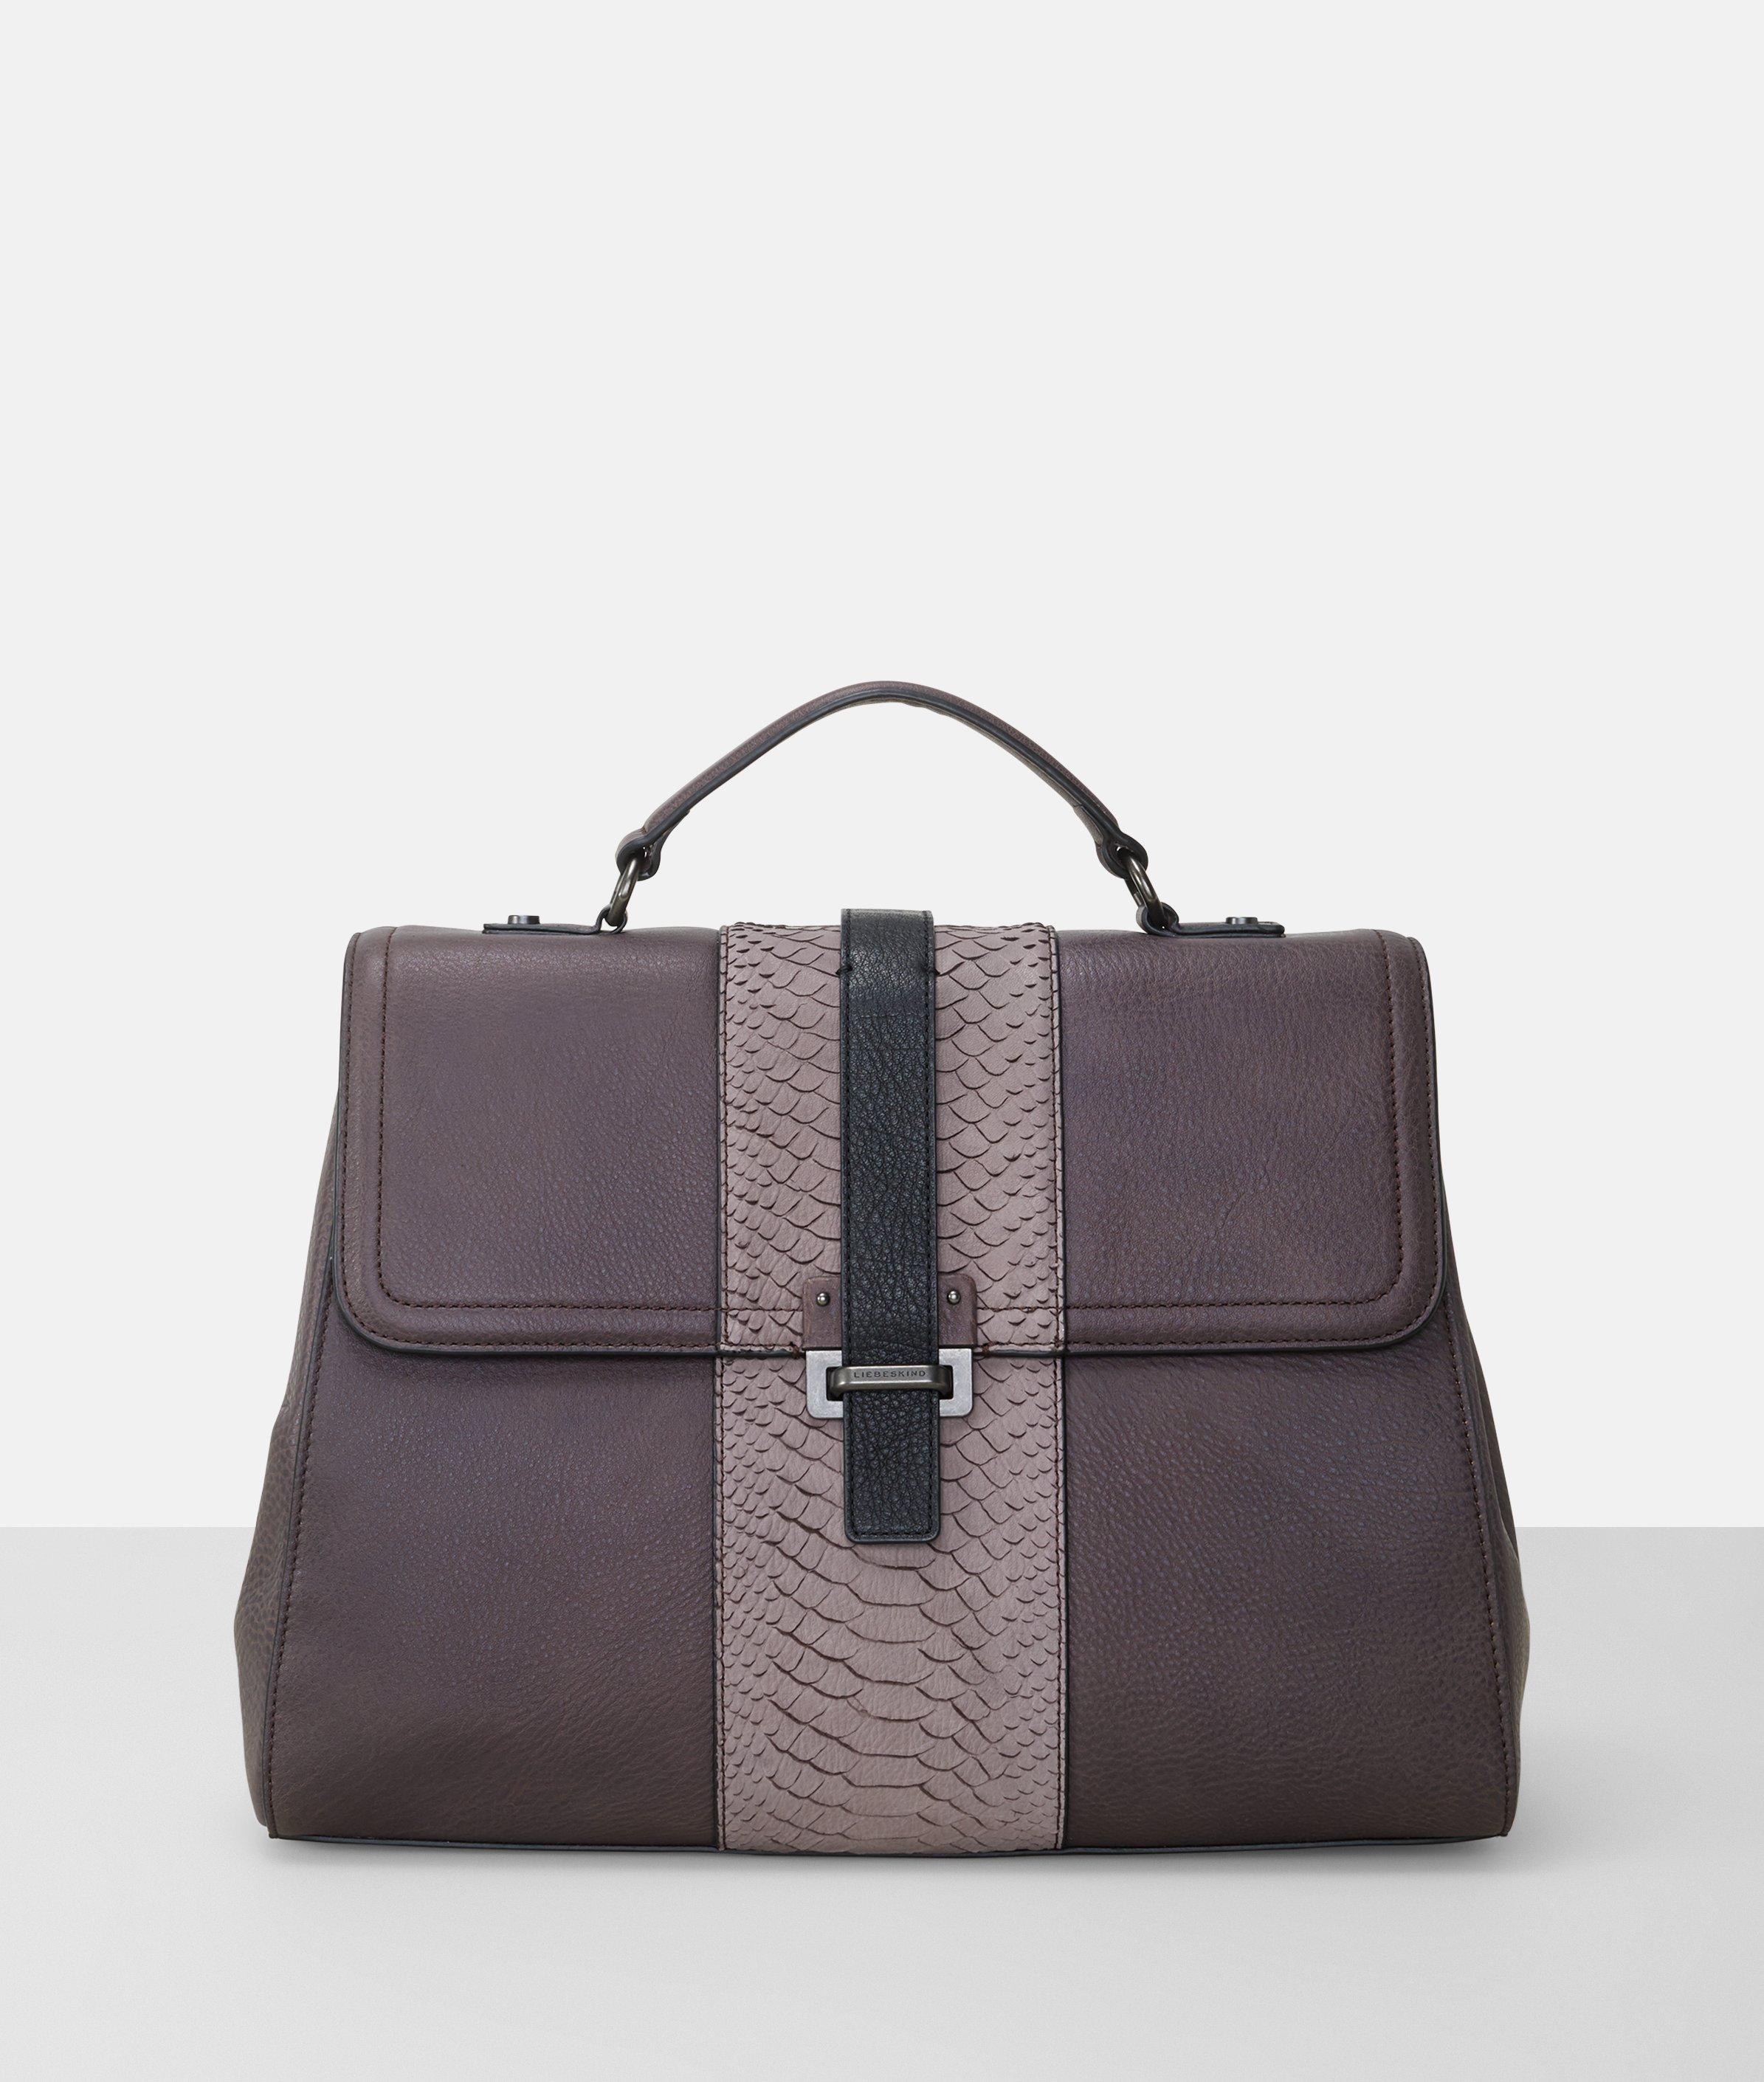 Shoulder bag with a magnetic clasp | Liebeskind Berlin